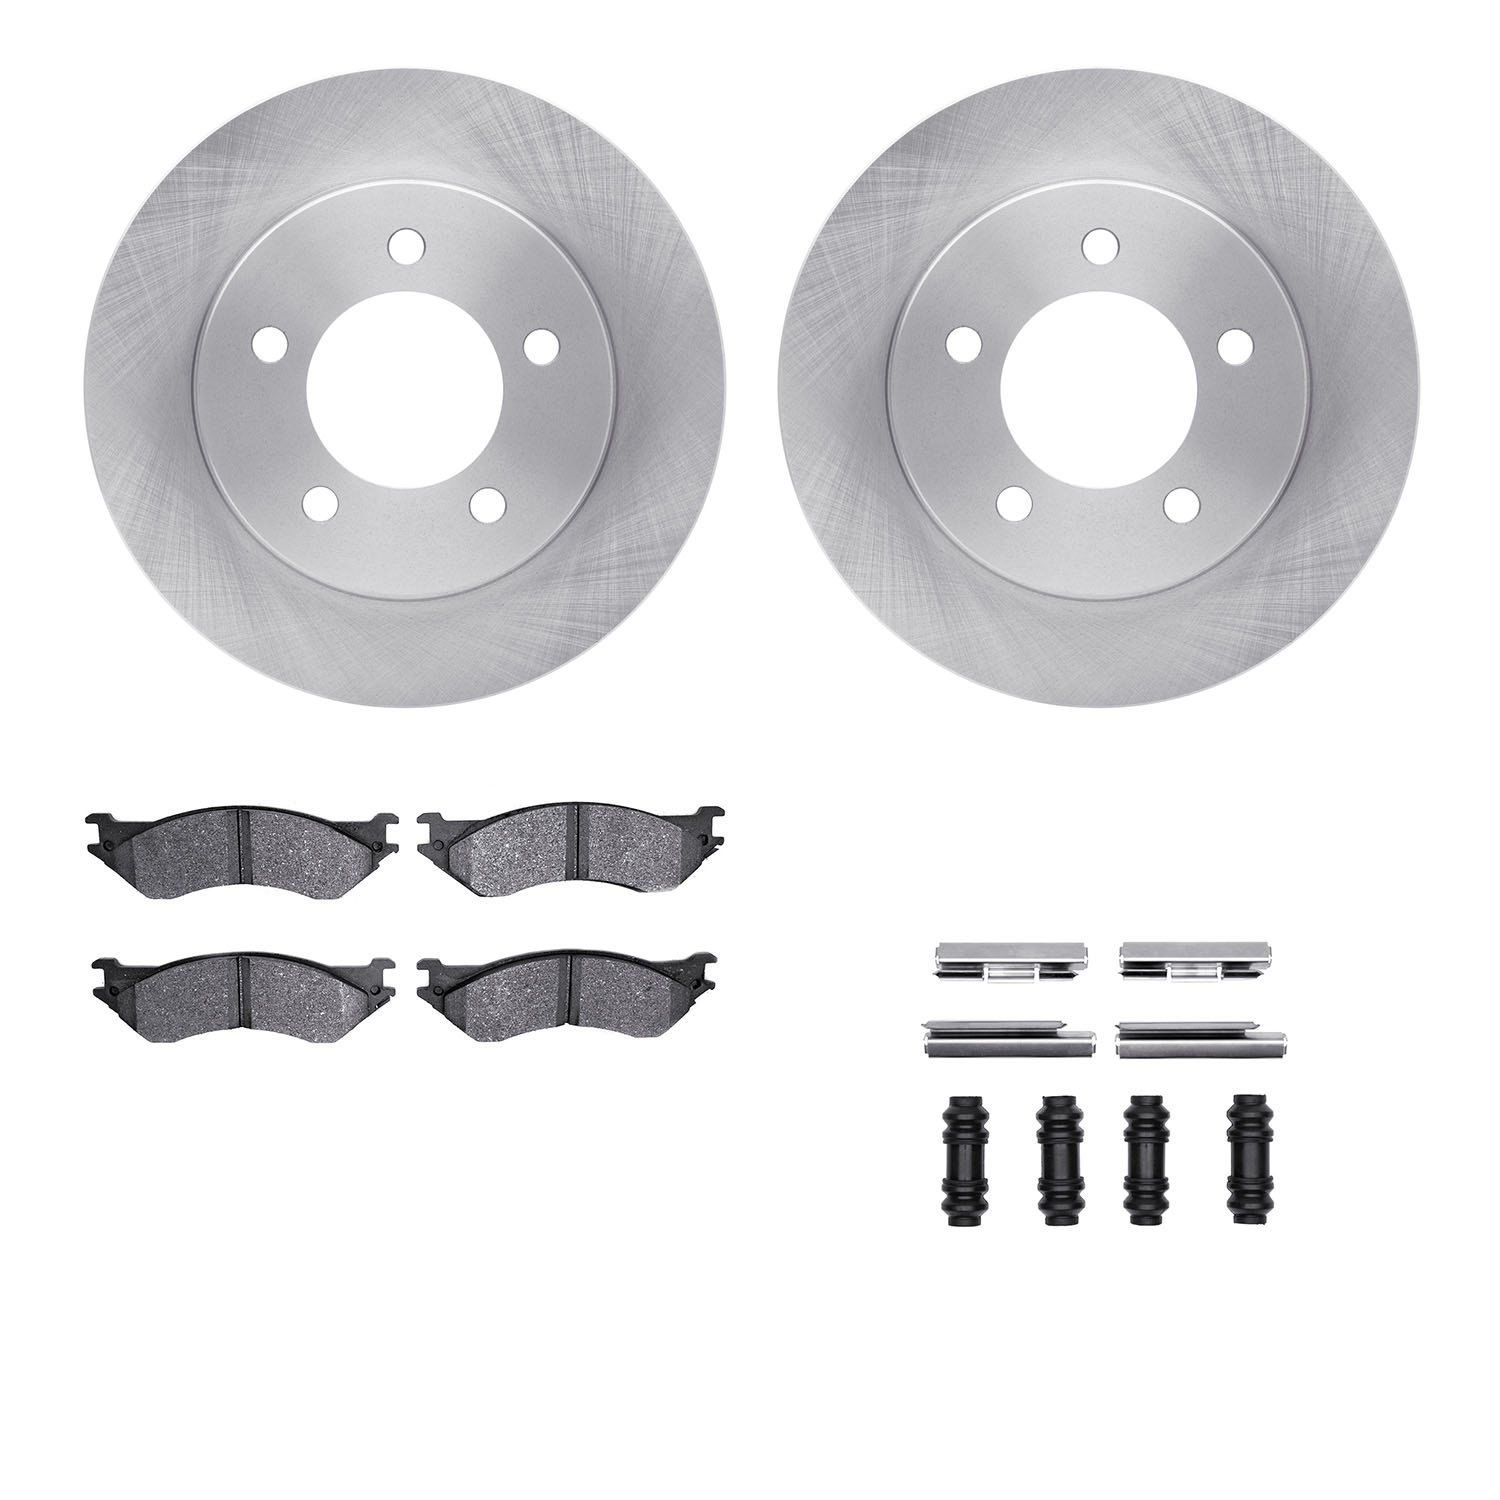 6412-54188 Brake Rotors with Ultimate-Duty Brake Pads Kit & Hardware, 1997-2002 Ford/Lincoln/Mercury/Mazda, Position: Front